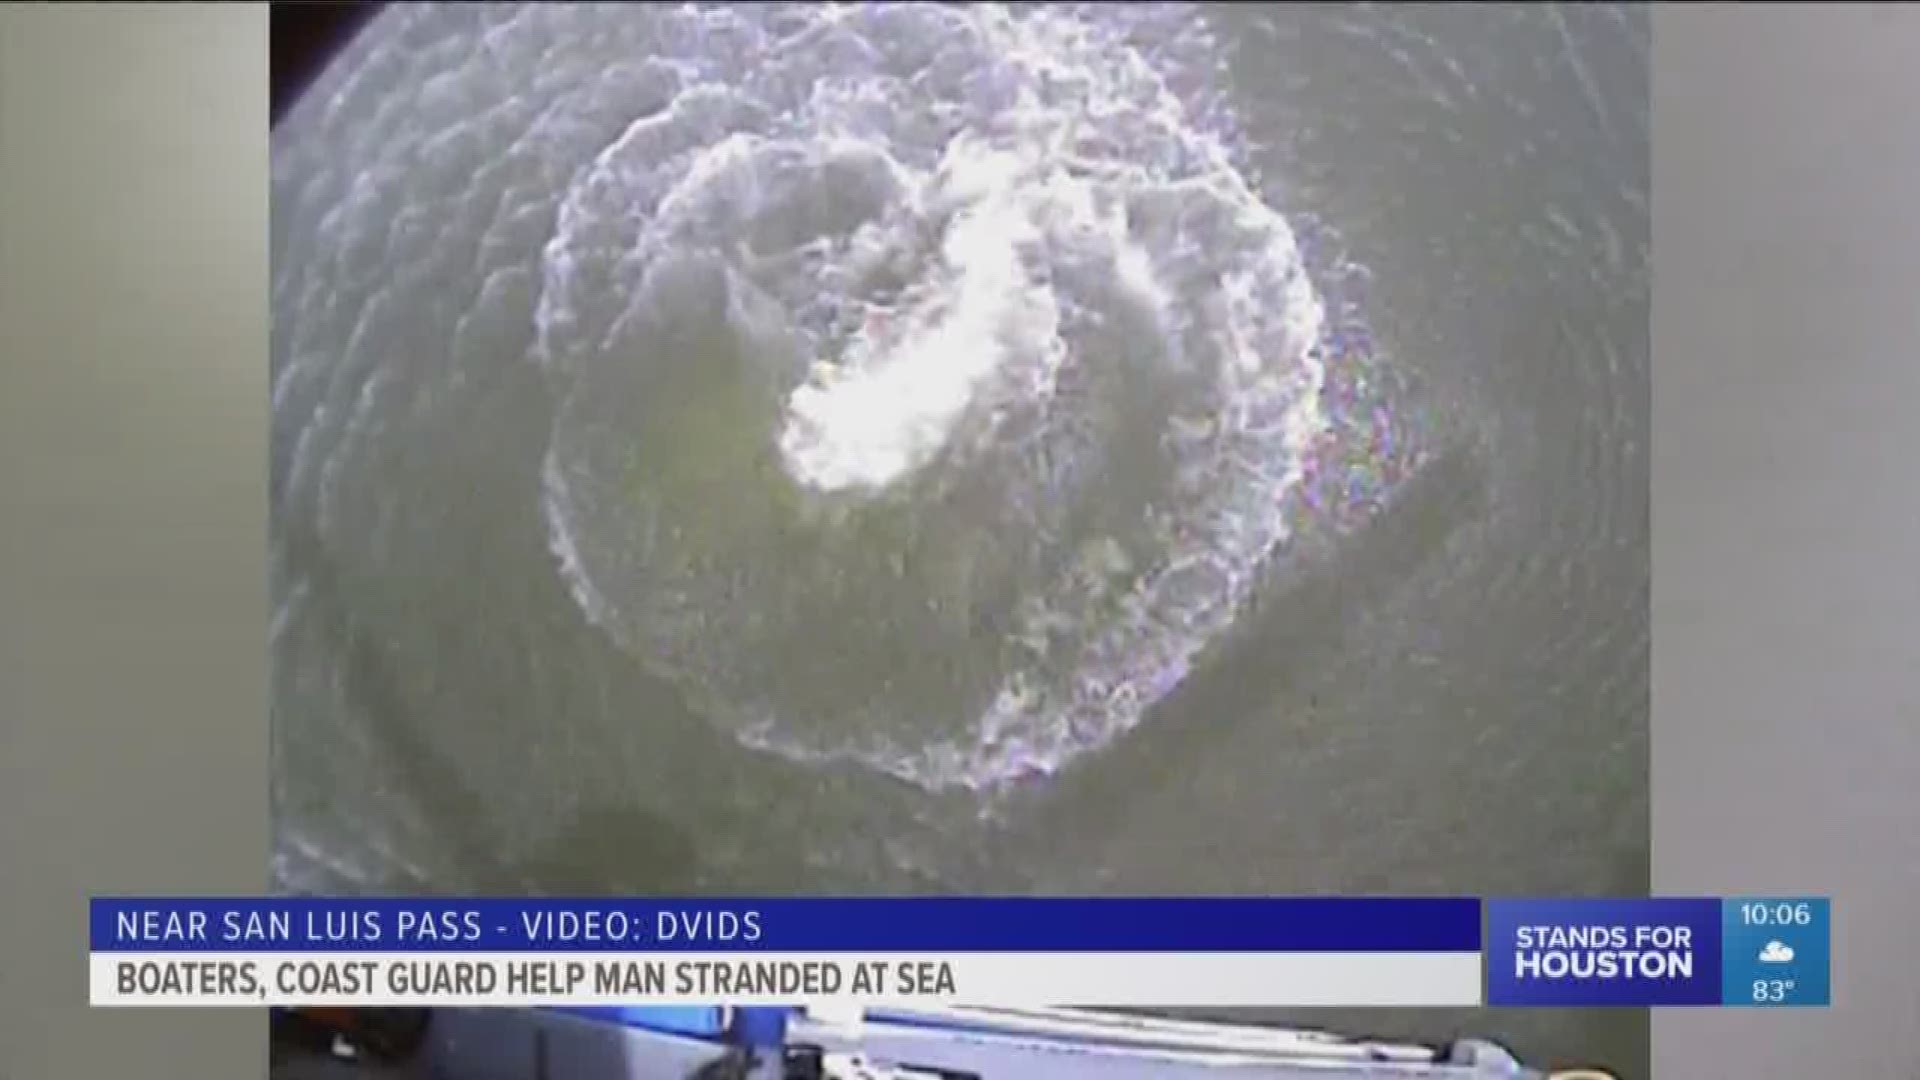 The Coast Guard and good Samaritans rescued a mariner from a fishing vessel taking on water one mile southeast of San Luis Pass, Texas, Saturday.